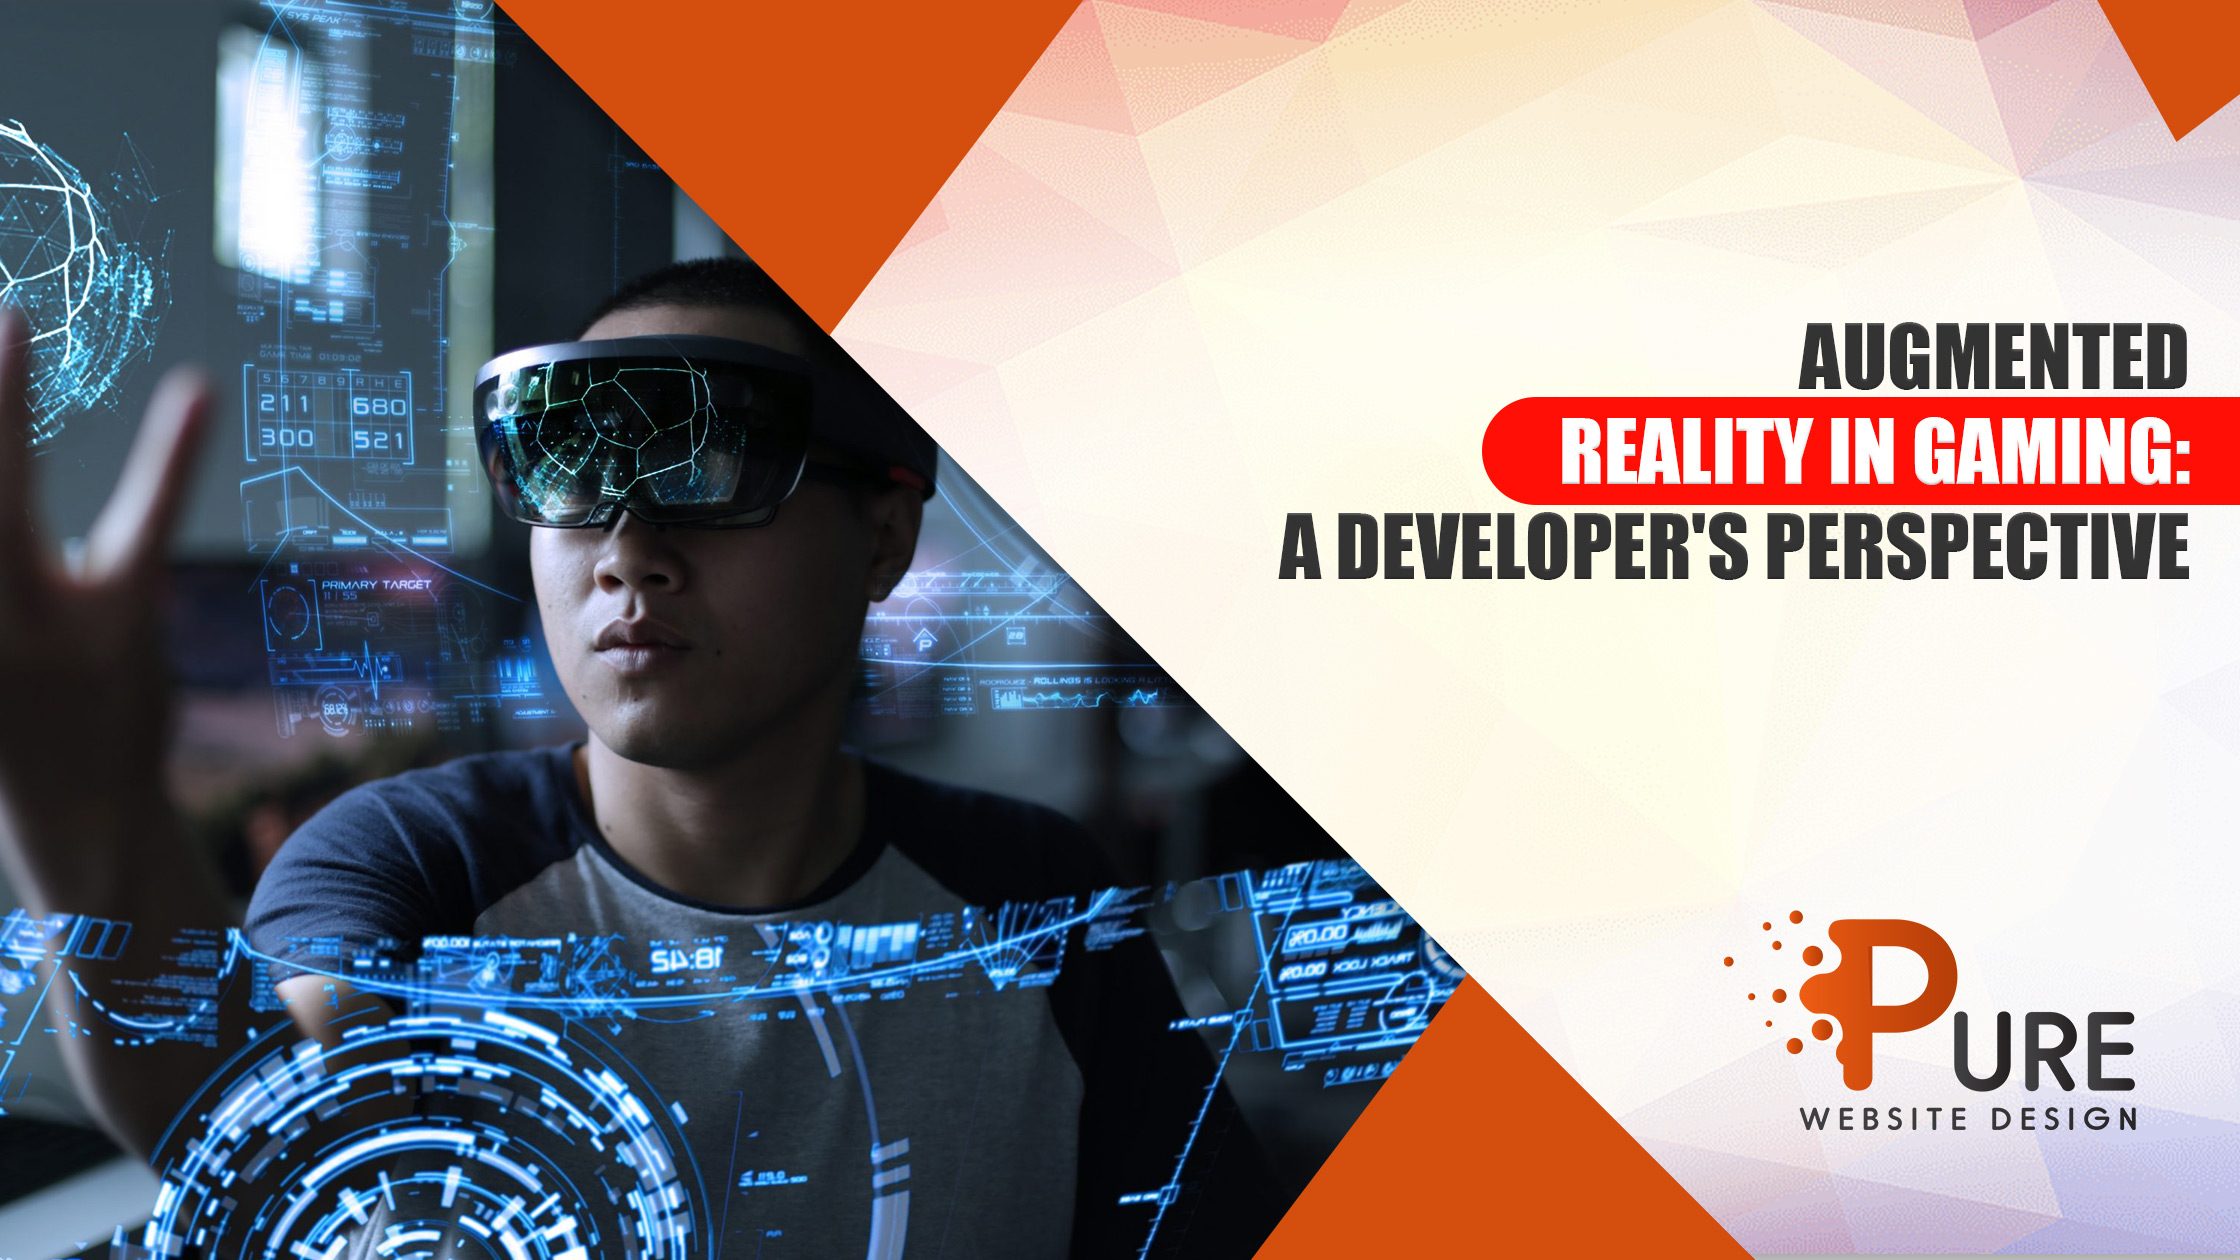 Augmented Reality in Gaming A Developer's Perspective